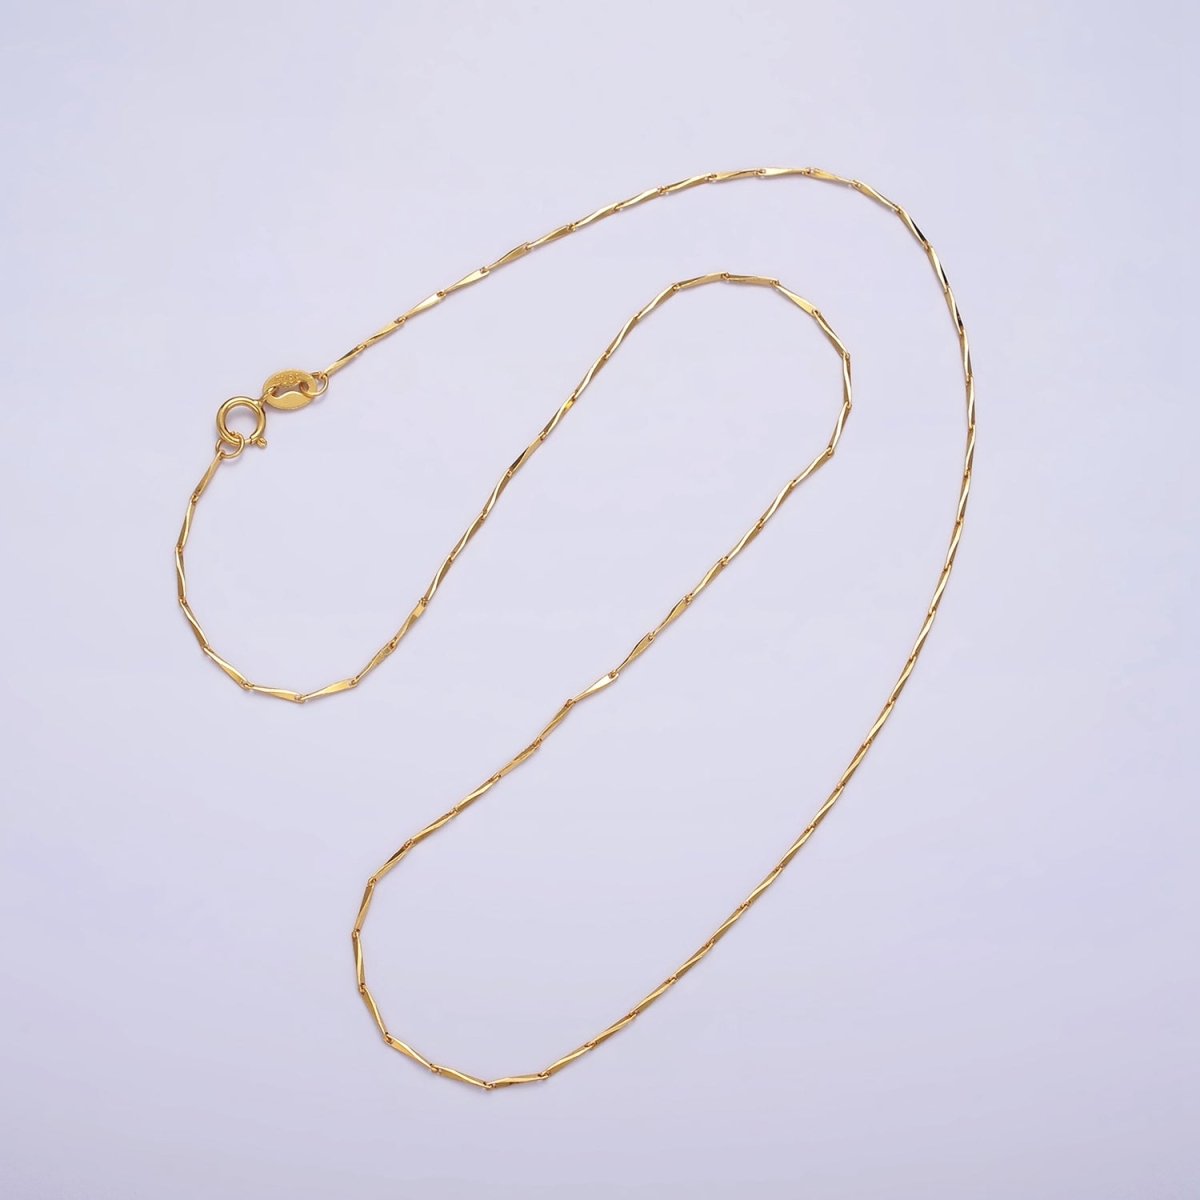 16K Gold Vermeil S925 Sterling Silver 1mm Dainty Horseshoe Barleycorn Unique 16 Inch Chain Necklace | WA-1958 Clearance Pricing - DLUXCA